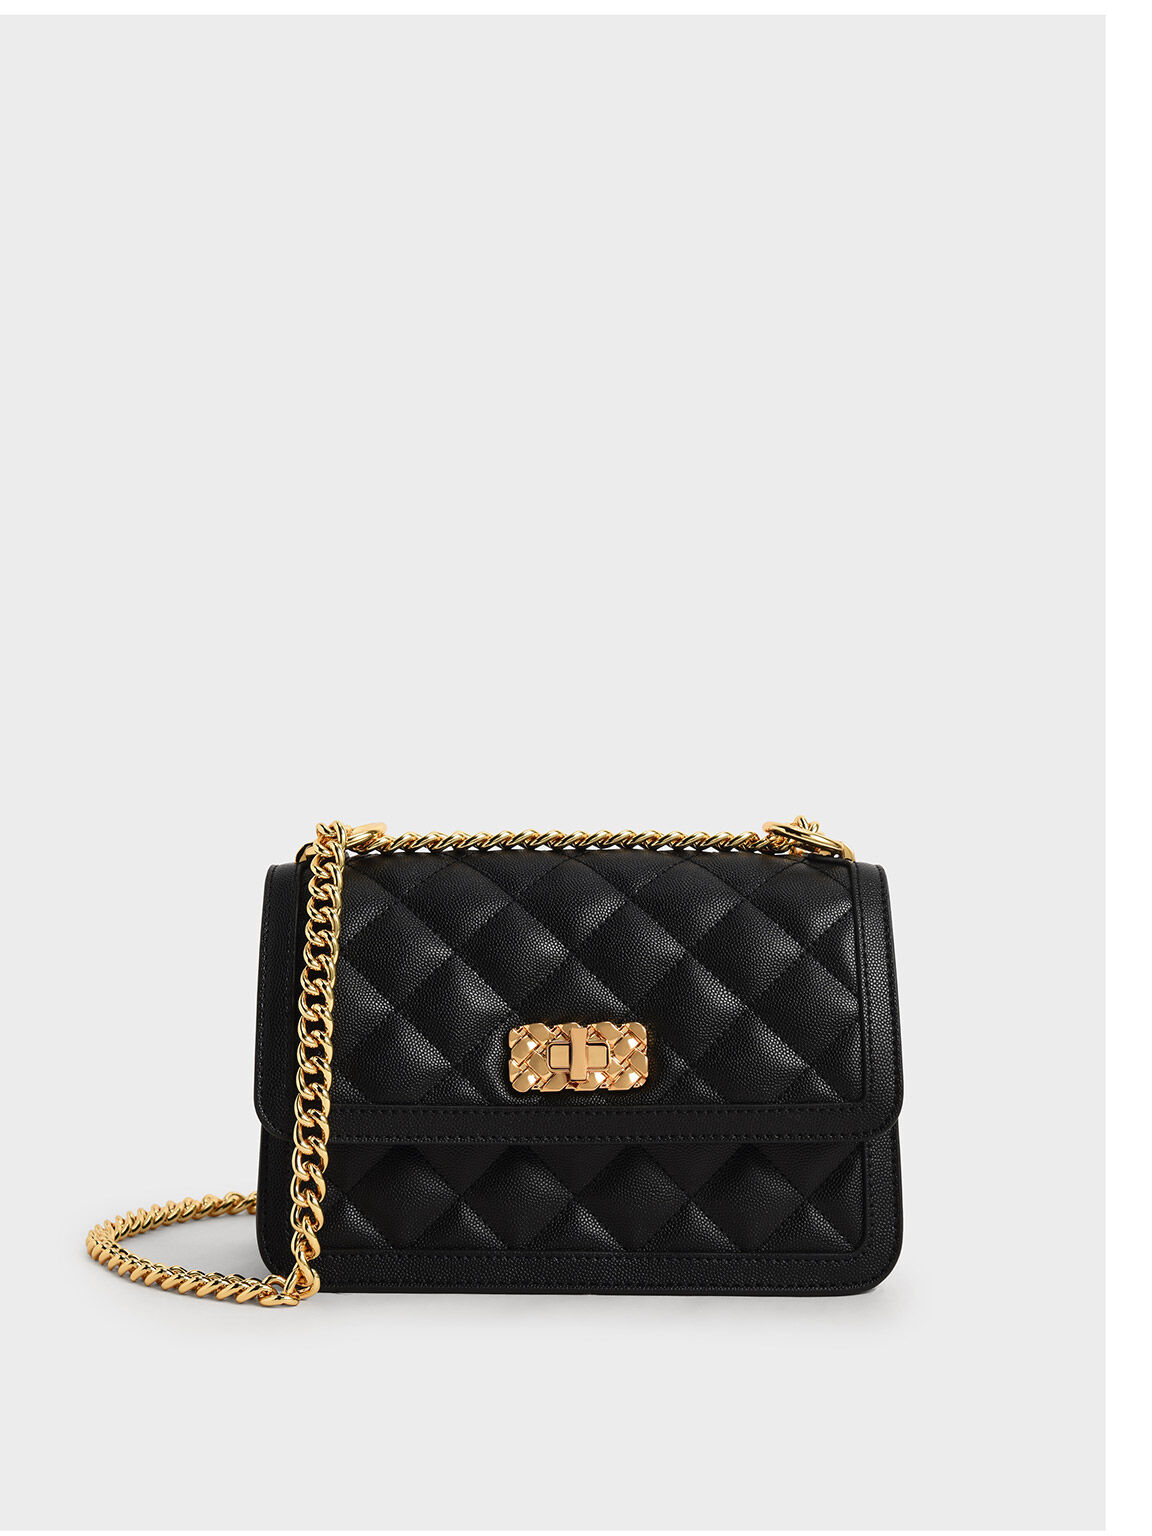 Charles & Keith Women's Quilted Chain Strap Bag